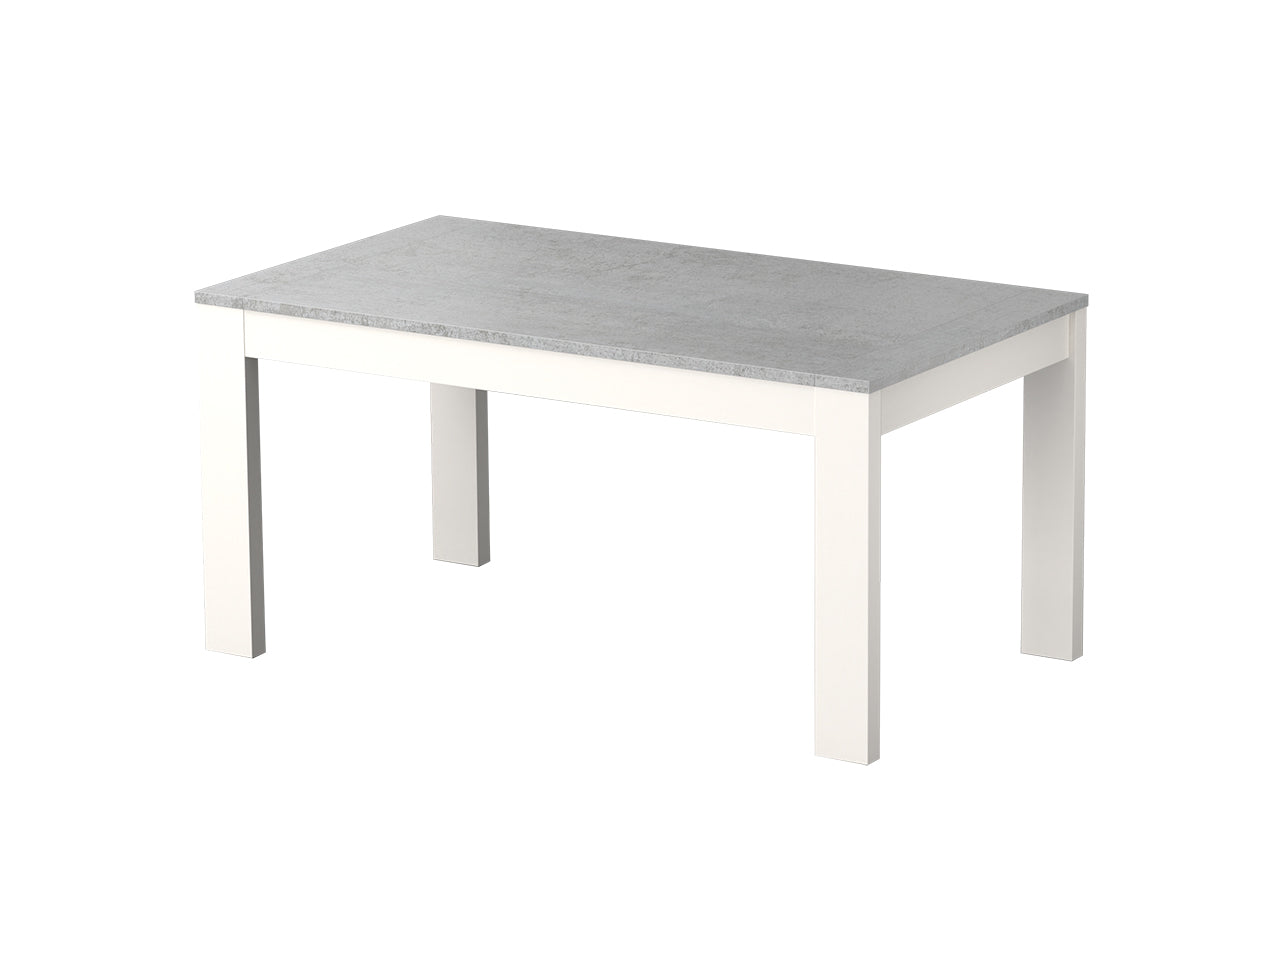 8-10 seater extendable table in white and grey wood.